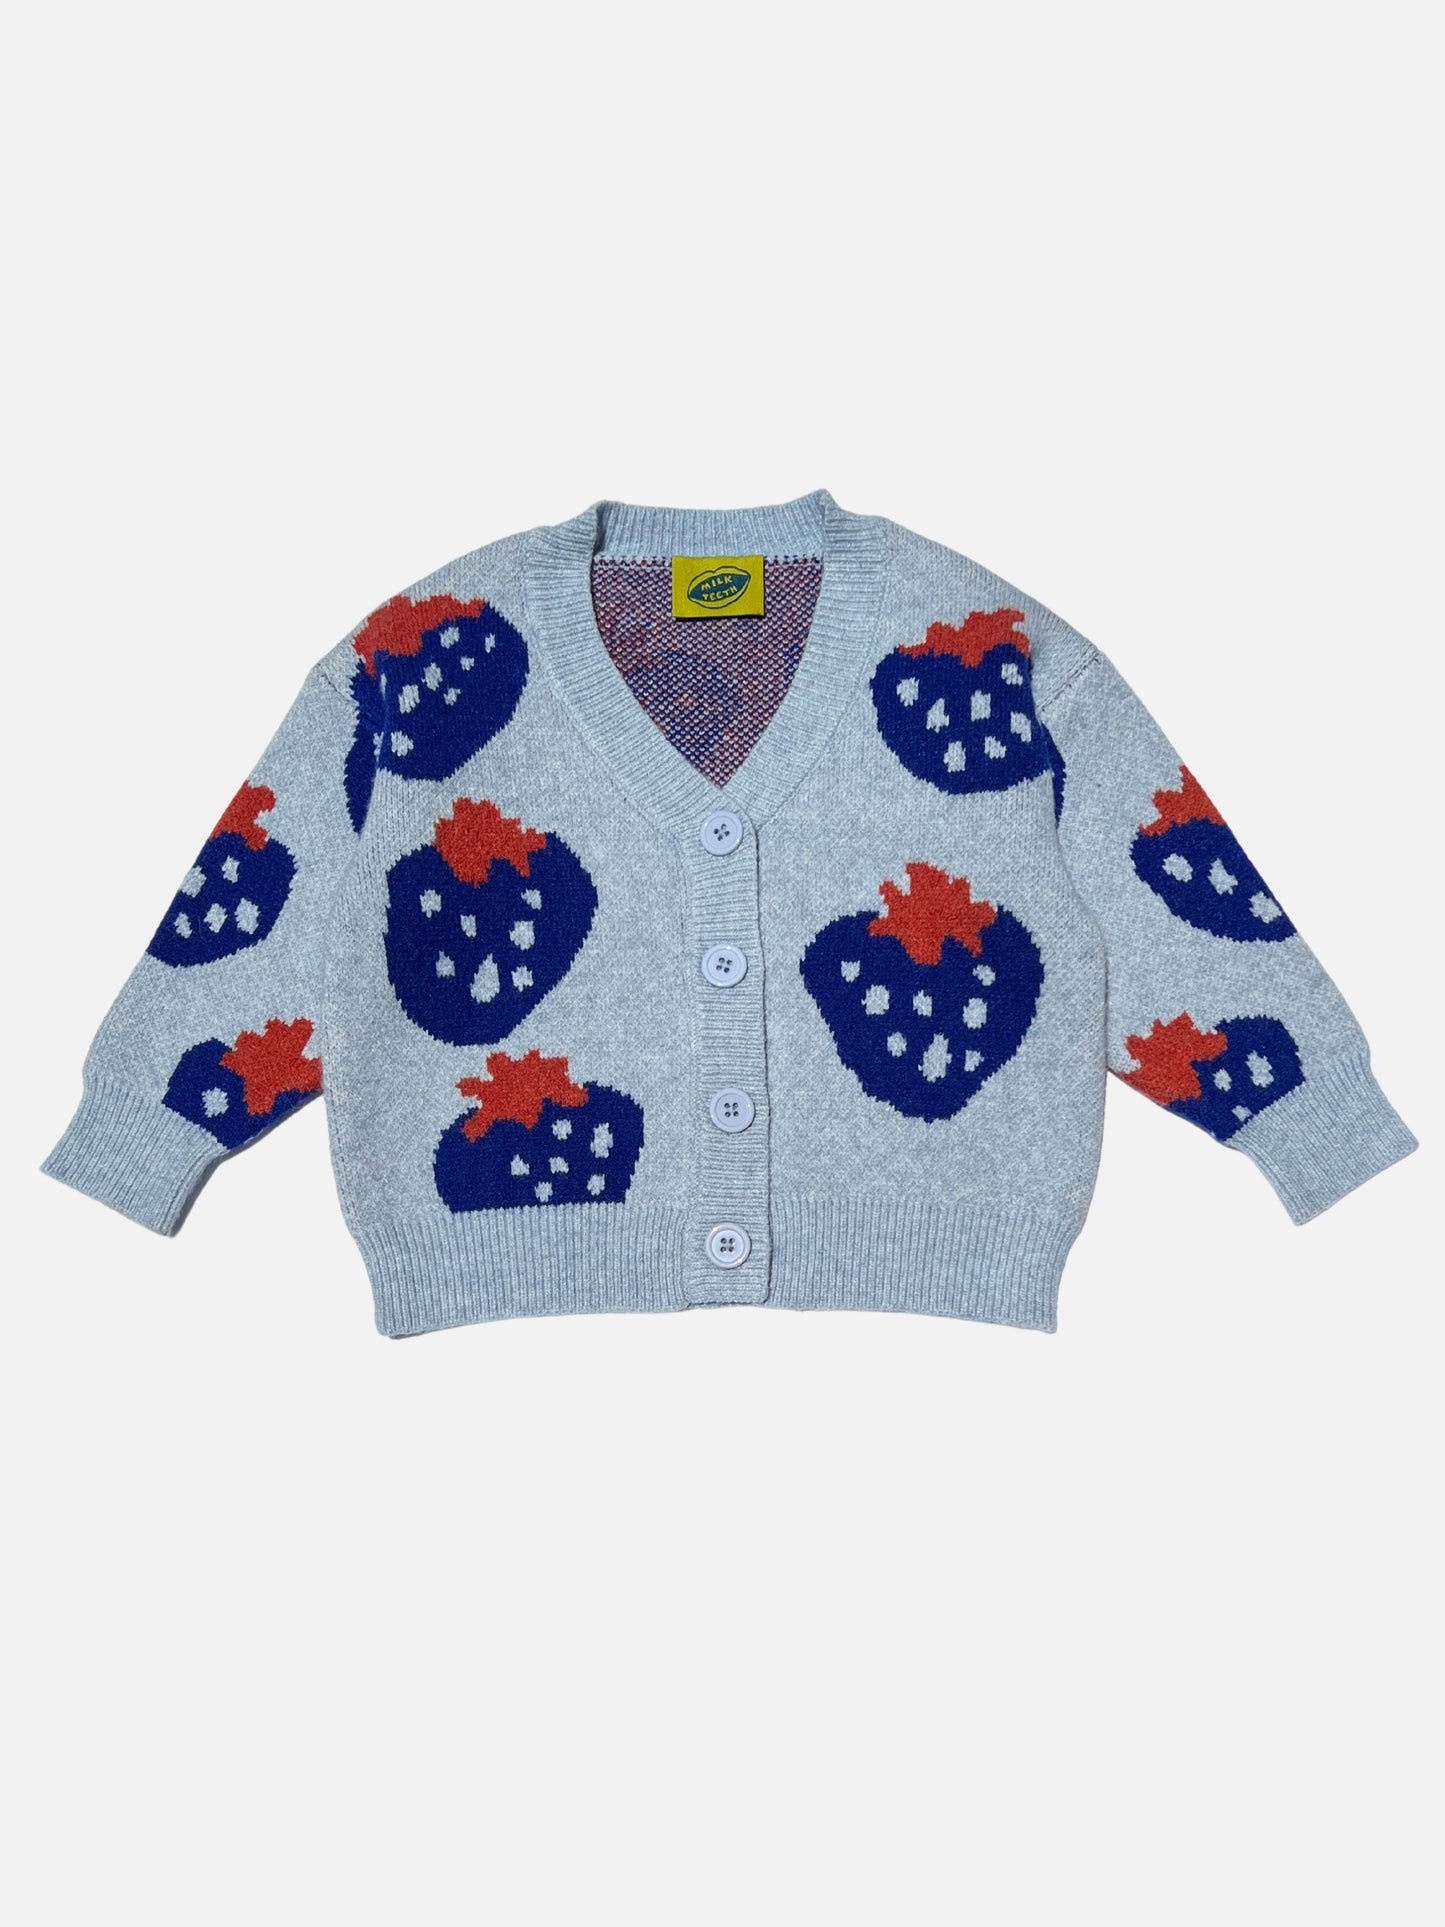 Sky | Front view of a kids v-neck cardigan in light blue with an all-over pattern of large blue strawberries with a red leaf. Cardigan has 4 buttons.